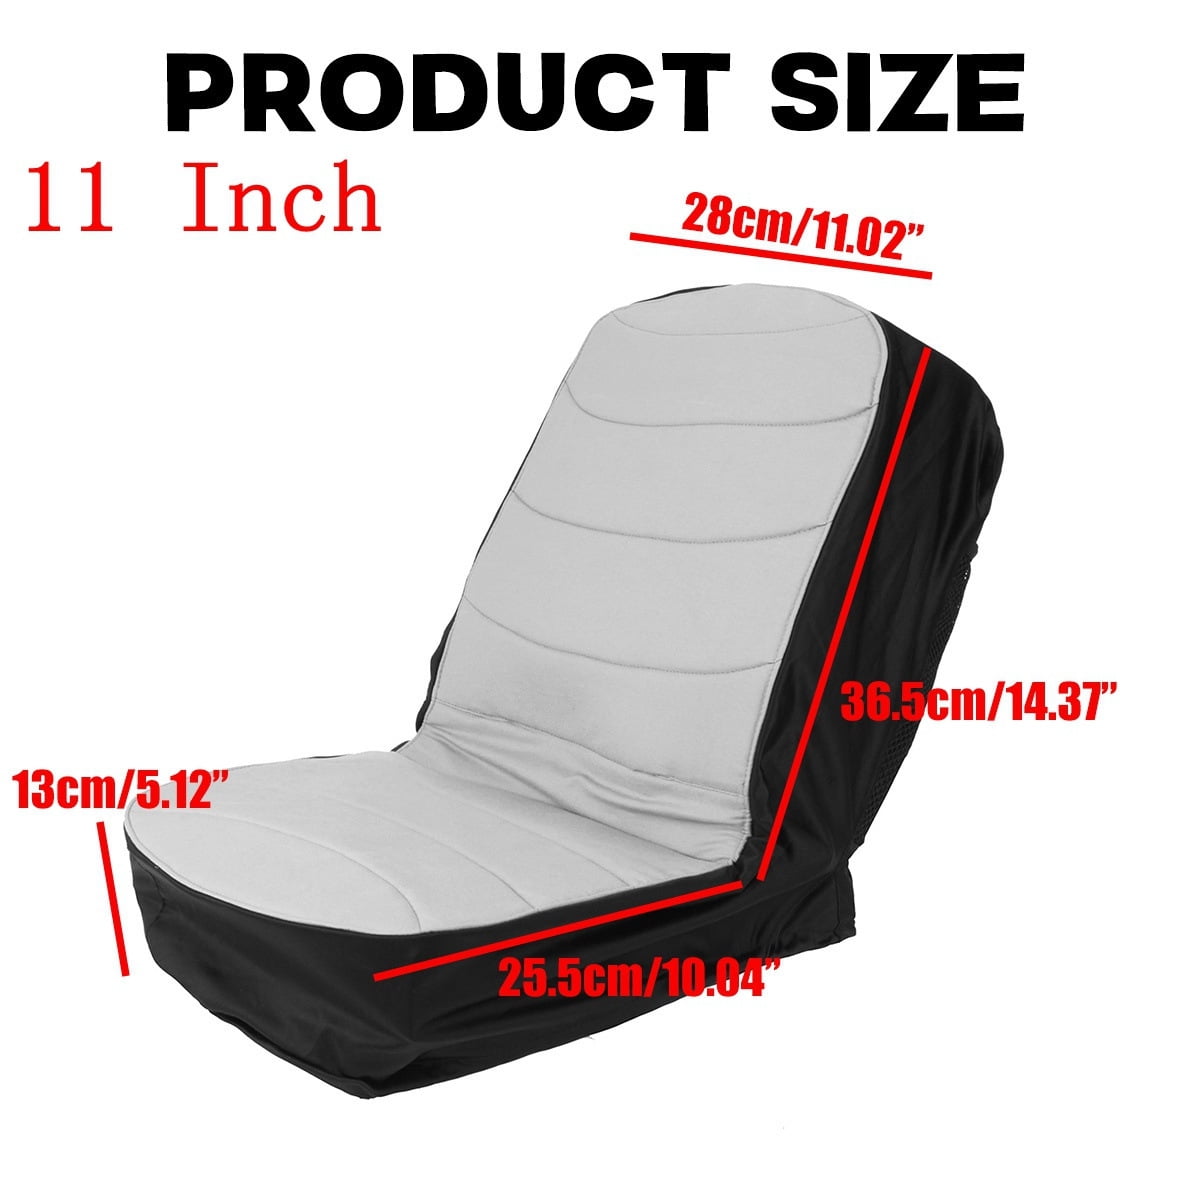 12679 Rotary MaxPower 334550 Tractor Seat Cover Black Fits Up To 15" Backrest 